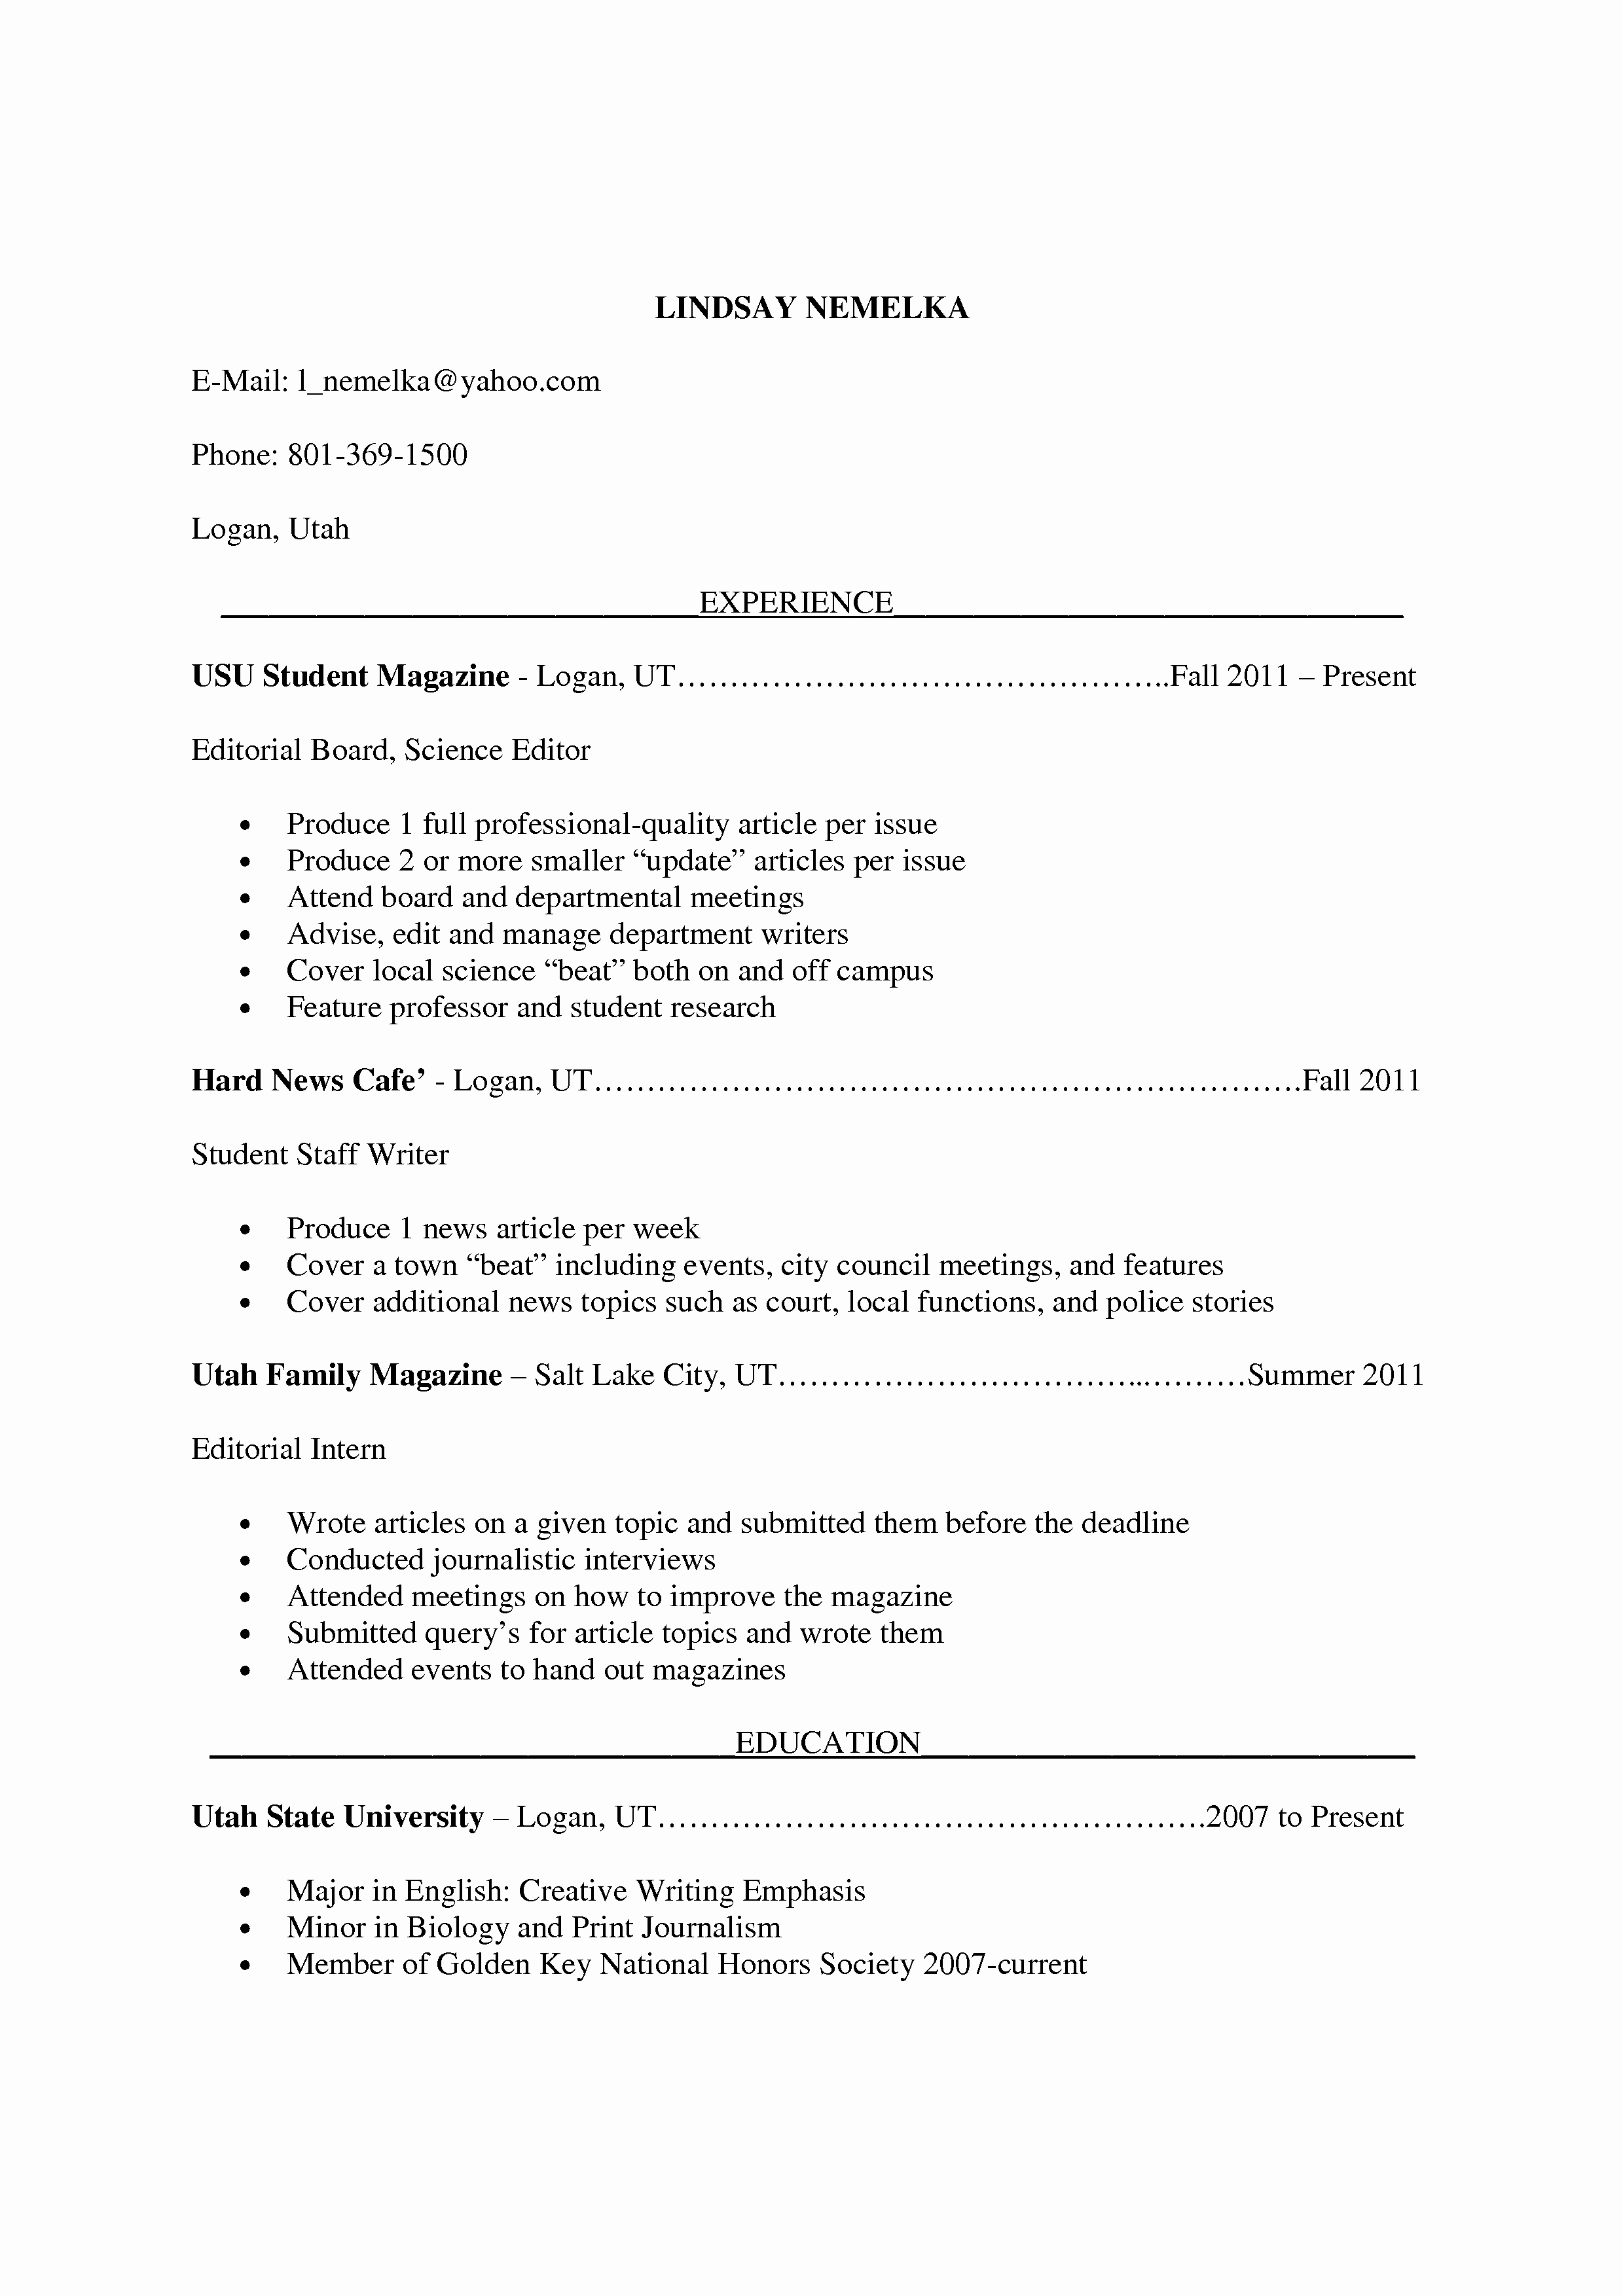 Biology Research assistant Resume Elegant Paper Writing Pany if You Need Help Writing A Paper